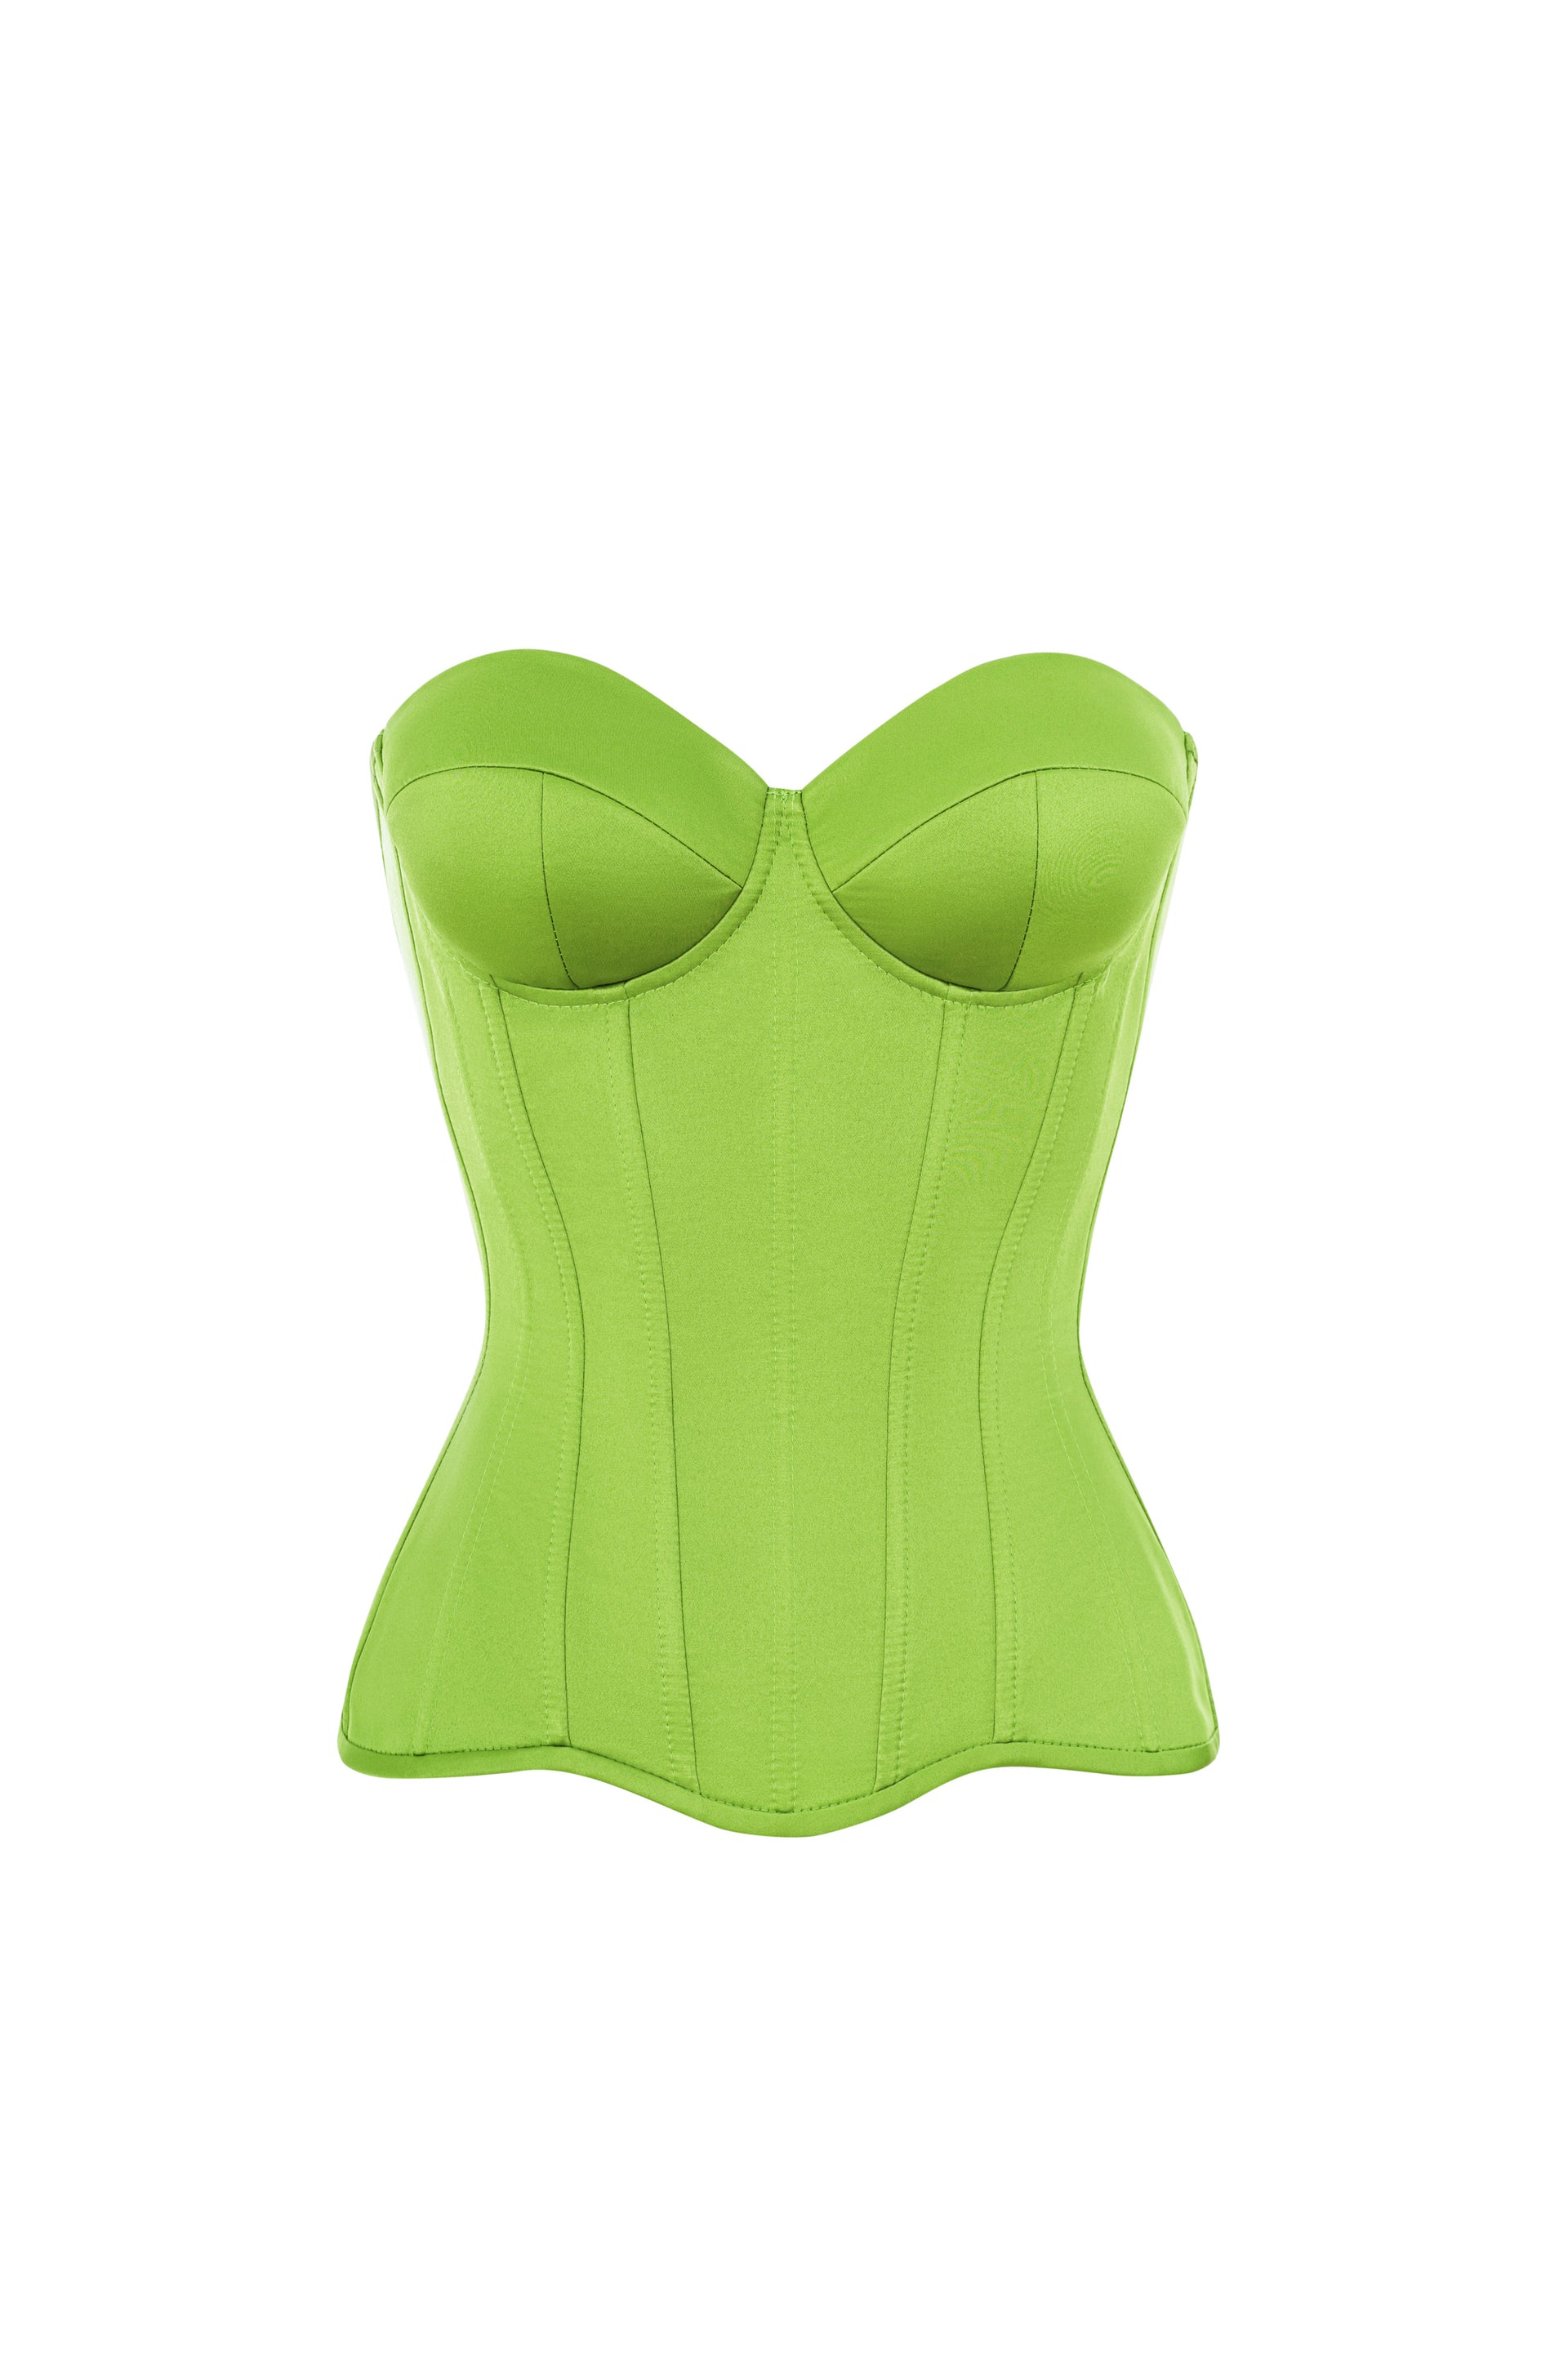 Light green satin corset with cups